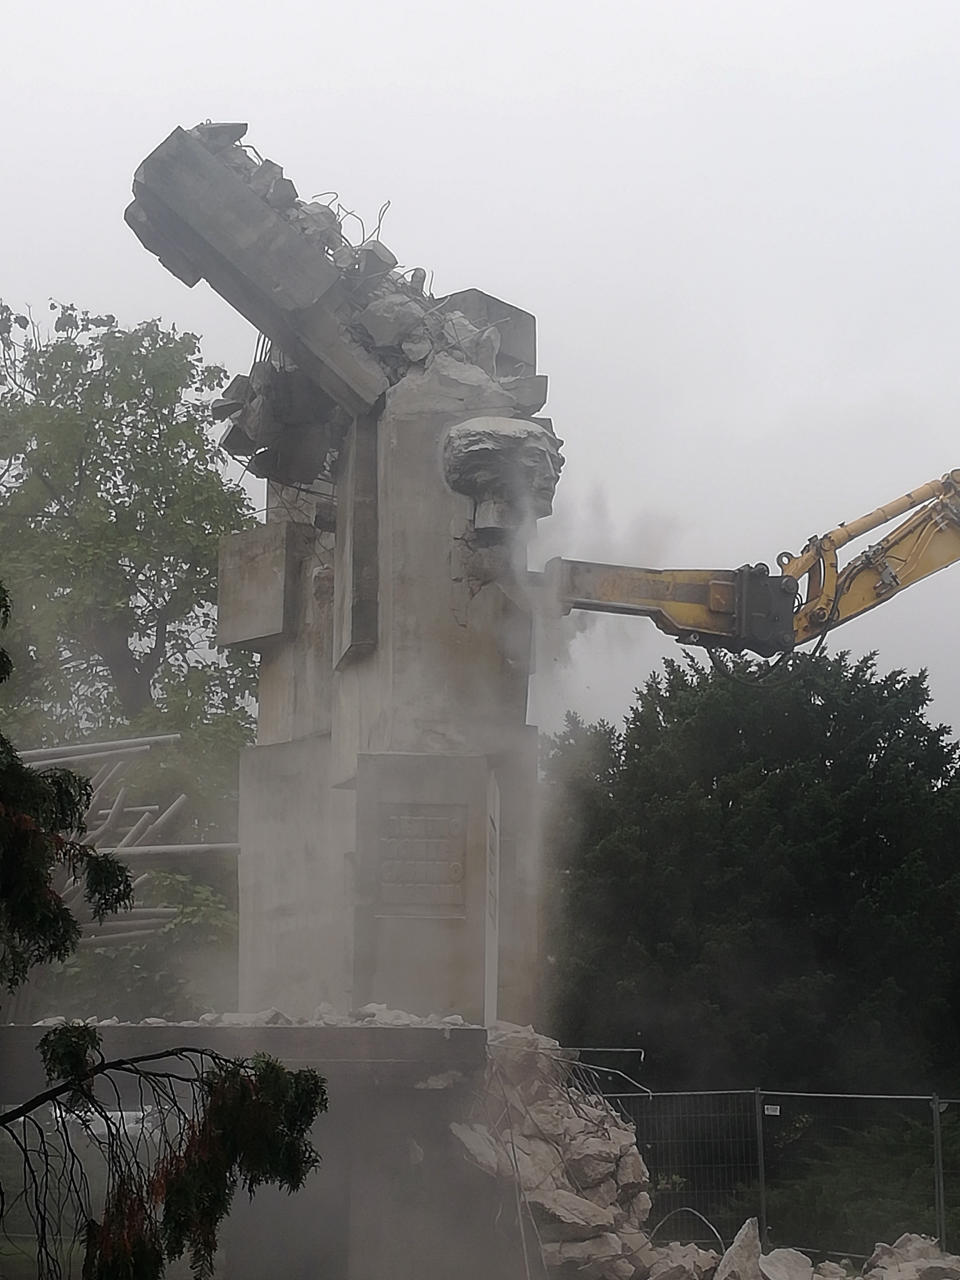 Workers begin to demolish a Soviet-era monument to the Red Army, in Brzeg, Poland, on Wednesday Aug. 24, 2022. Poland on Wednesday began demolishing a memorial to the Soviet Red Army soldiers, an unwanted reminder of the power Moscow once held over Poland whose presence became even more objectionable after Russia's invasion of Ukraine. (IPN Wroclaw via AP)